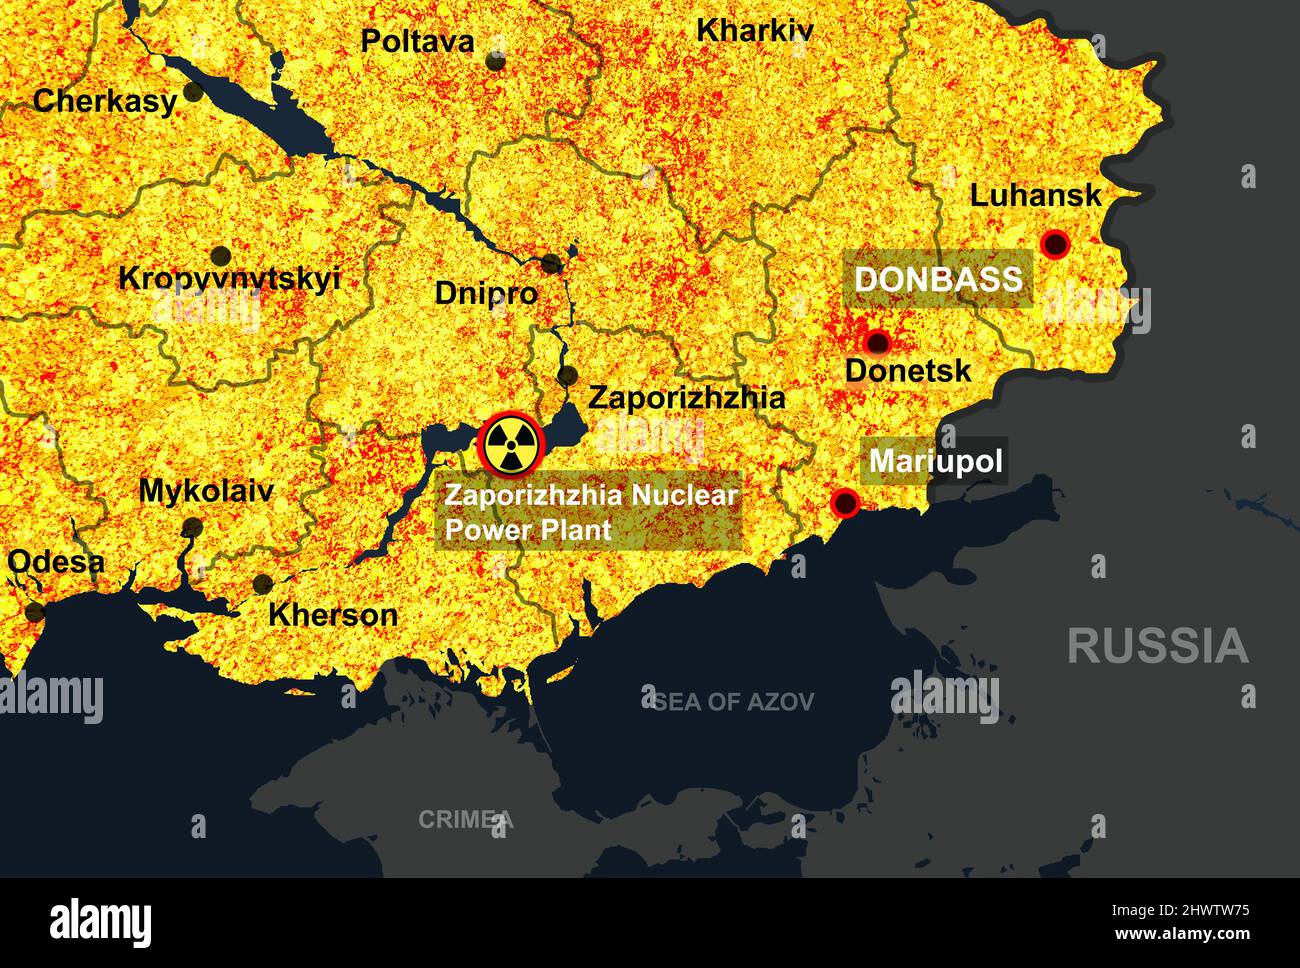 War in Ukraine on map, illustration of cities and hot spots in south-east of Ukraine. Zaporizhzhia Nuclear Power Plant and Mariupol in Russia-Ukraine Stock Photo